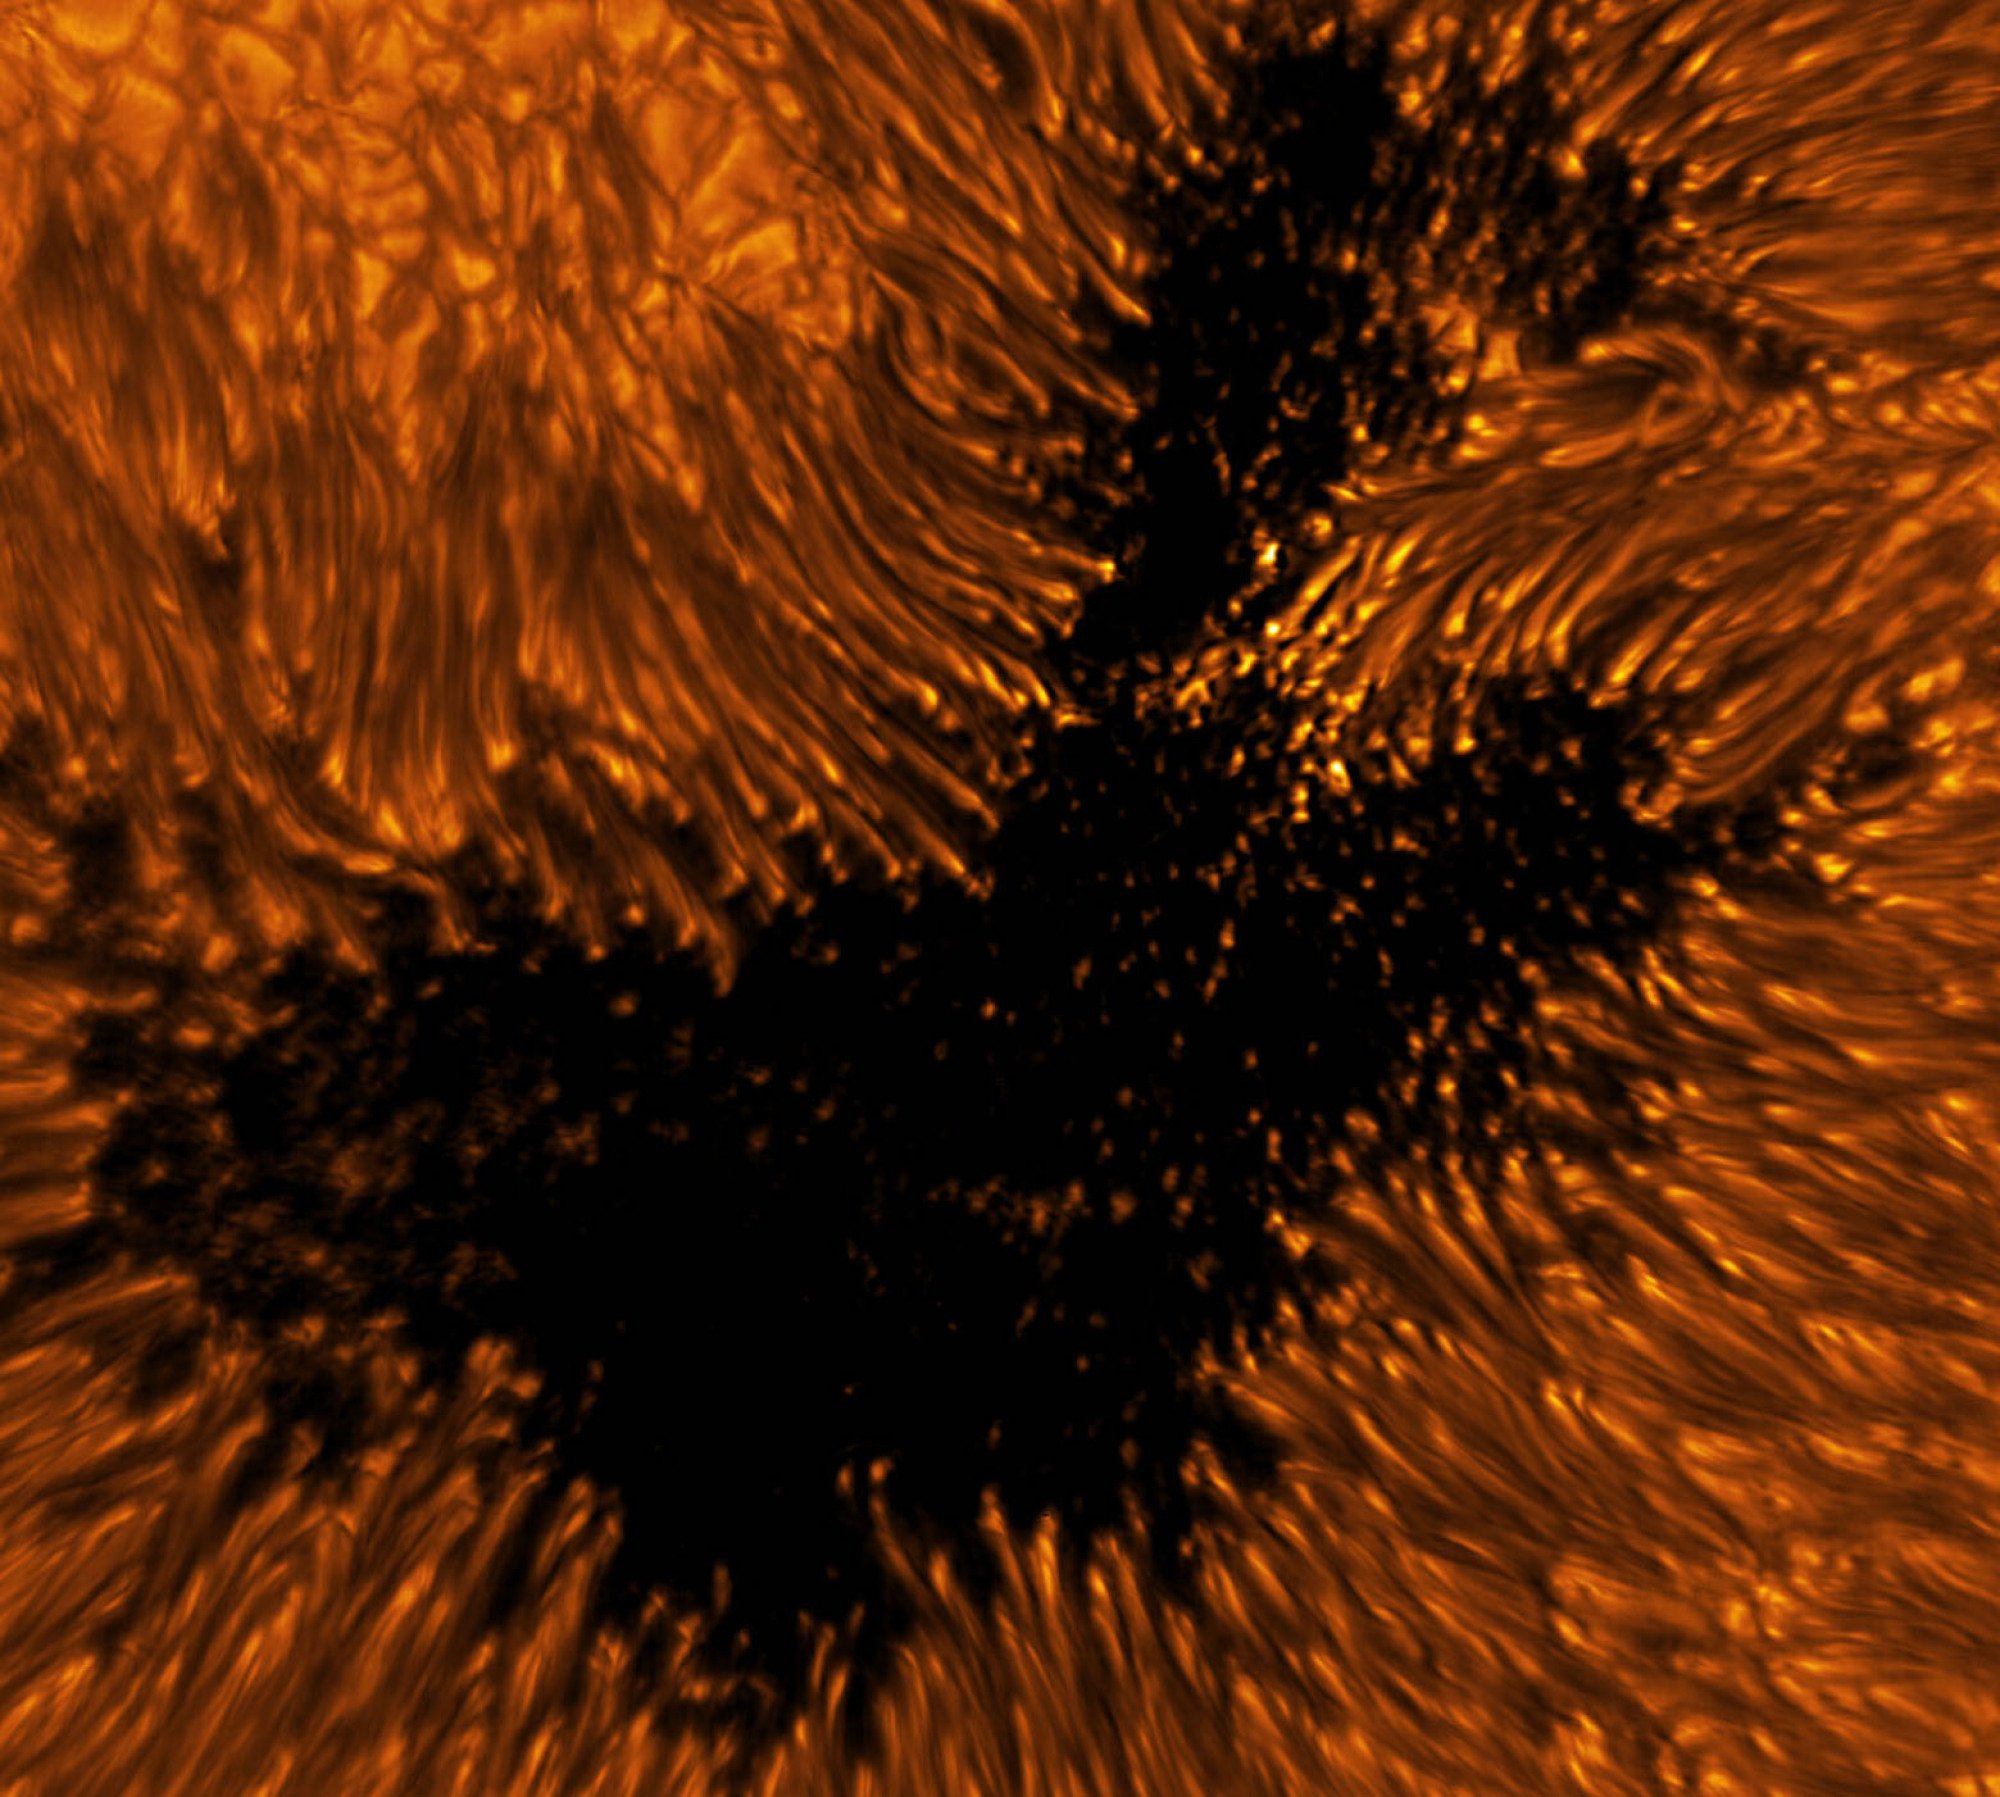 Looking at a sunspot close up